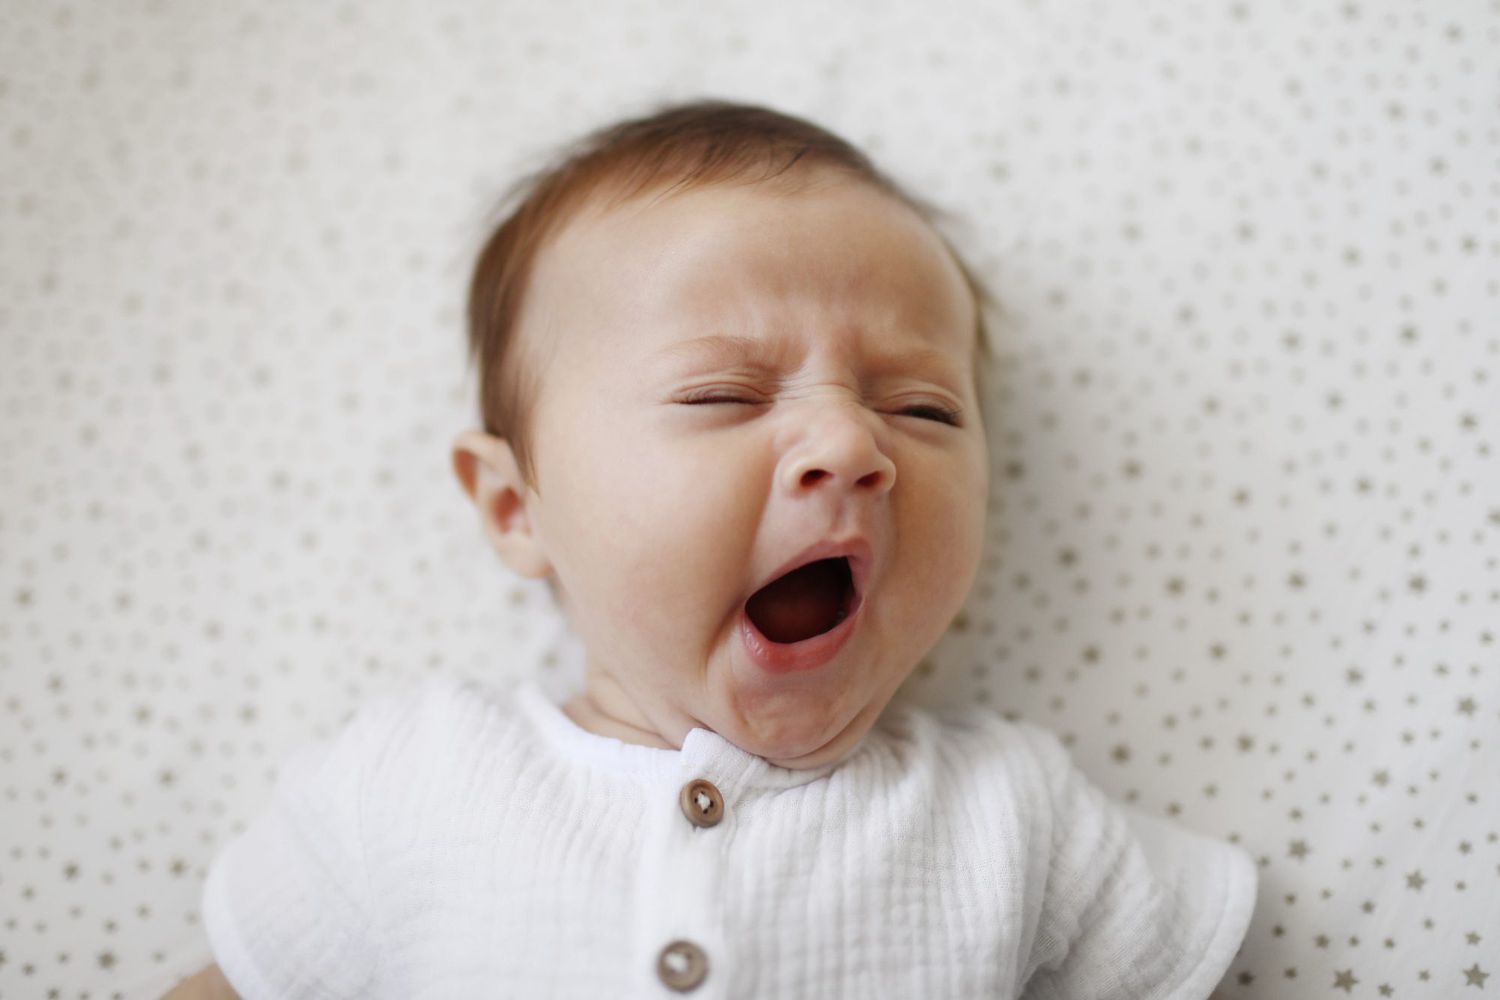 An image of a baby yawning.